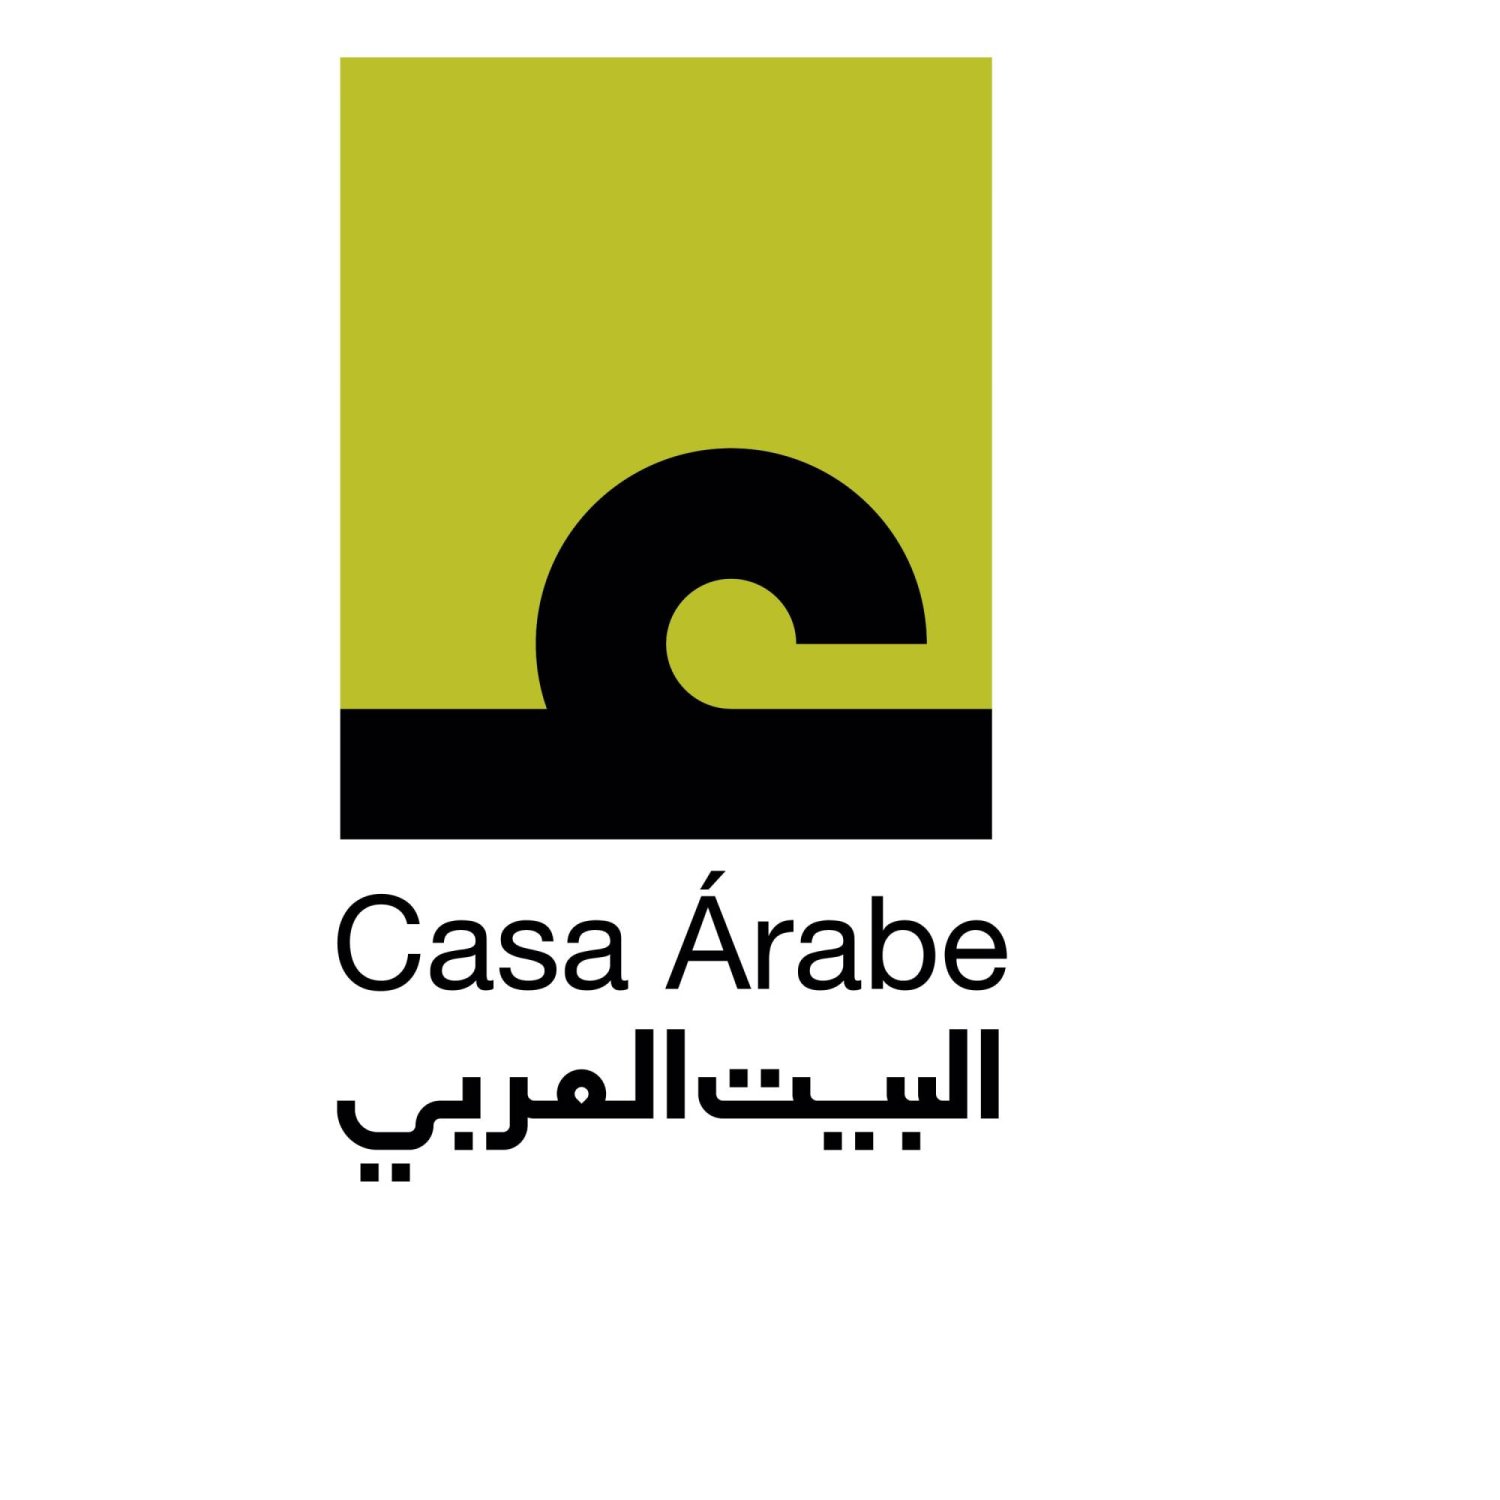 The award’s Board of Trustees and Scientific Committee decision to name Casa Árabe as this year's Cultural Personality of the Year was unanimous. WAM